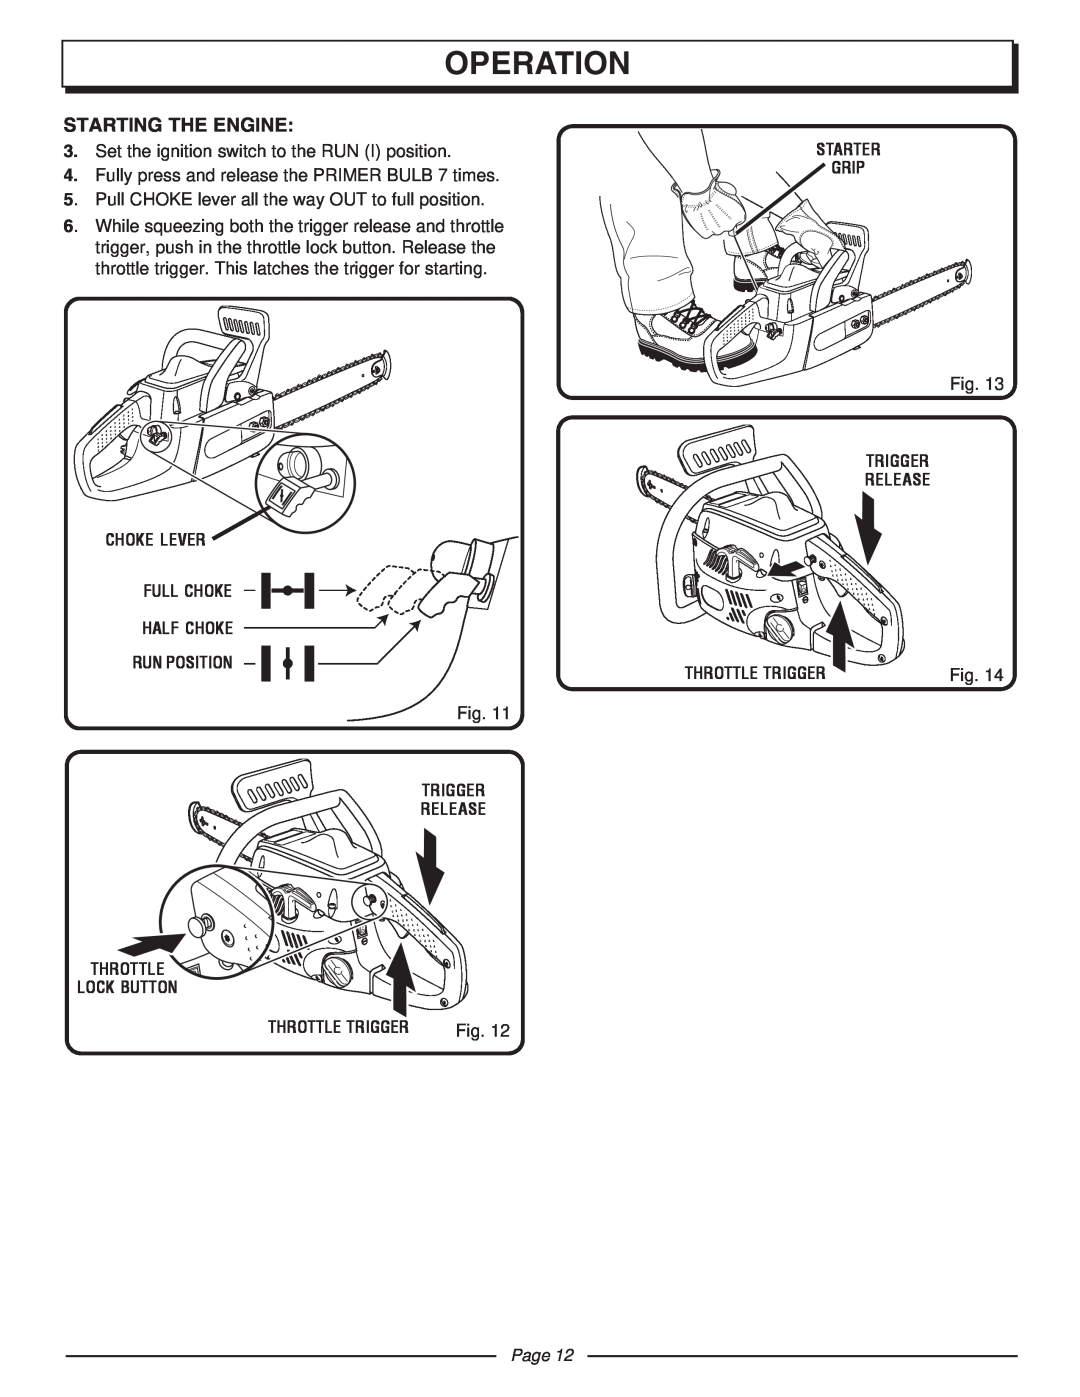 Homelite UT10510A manual Operation, Starting The Engine, Page 